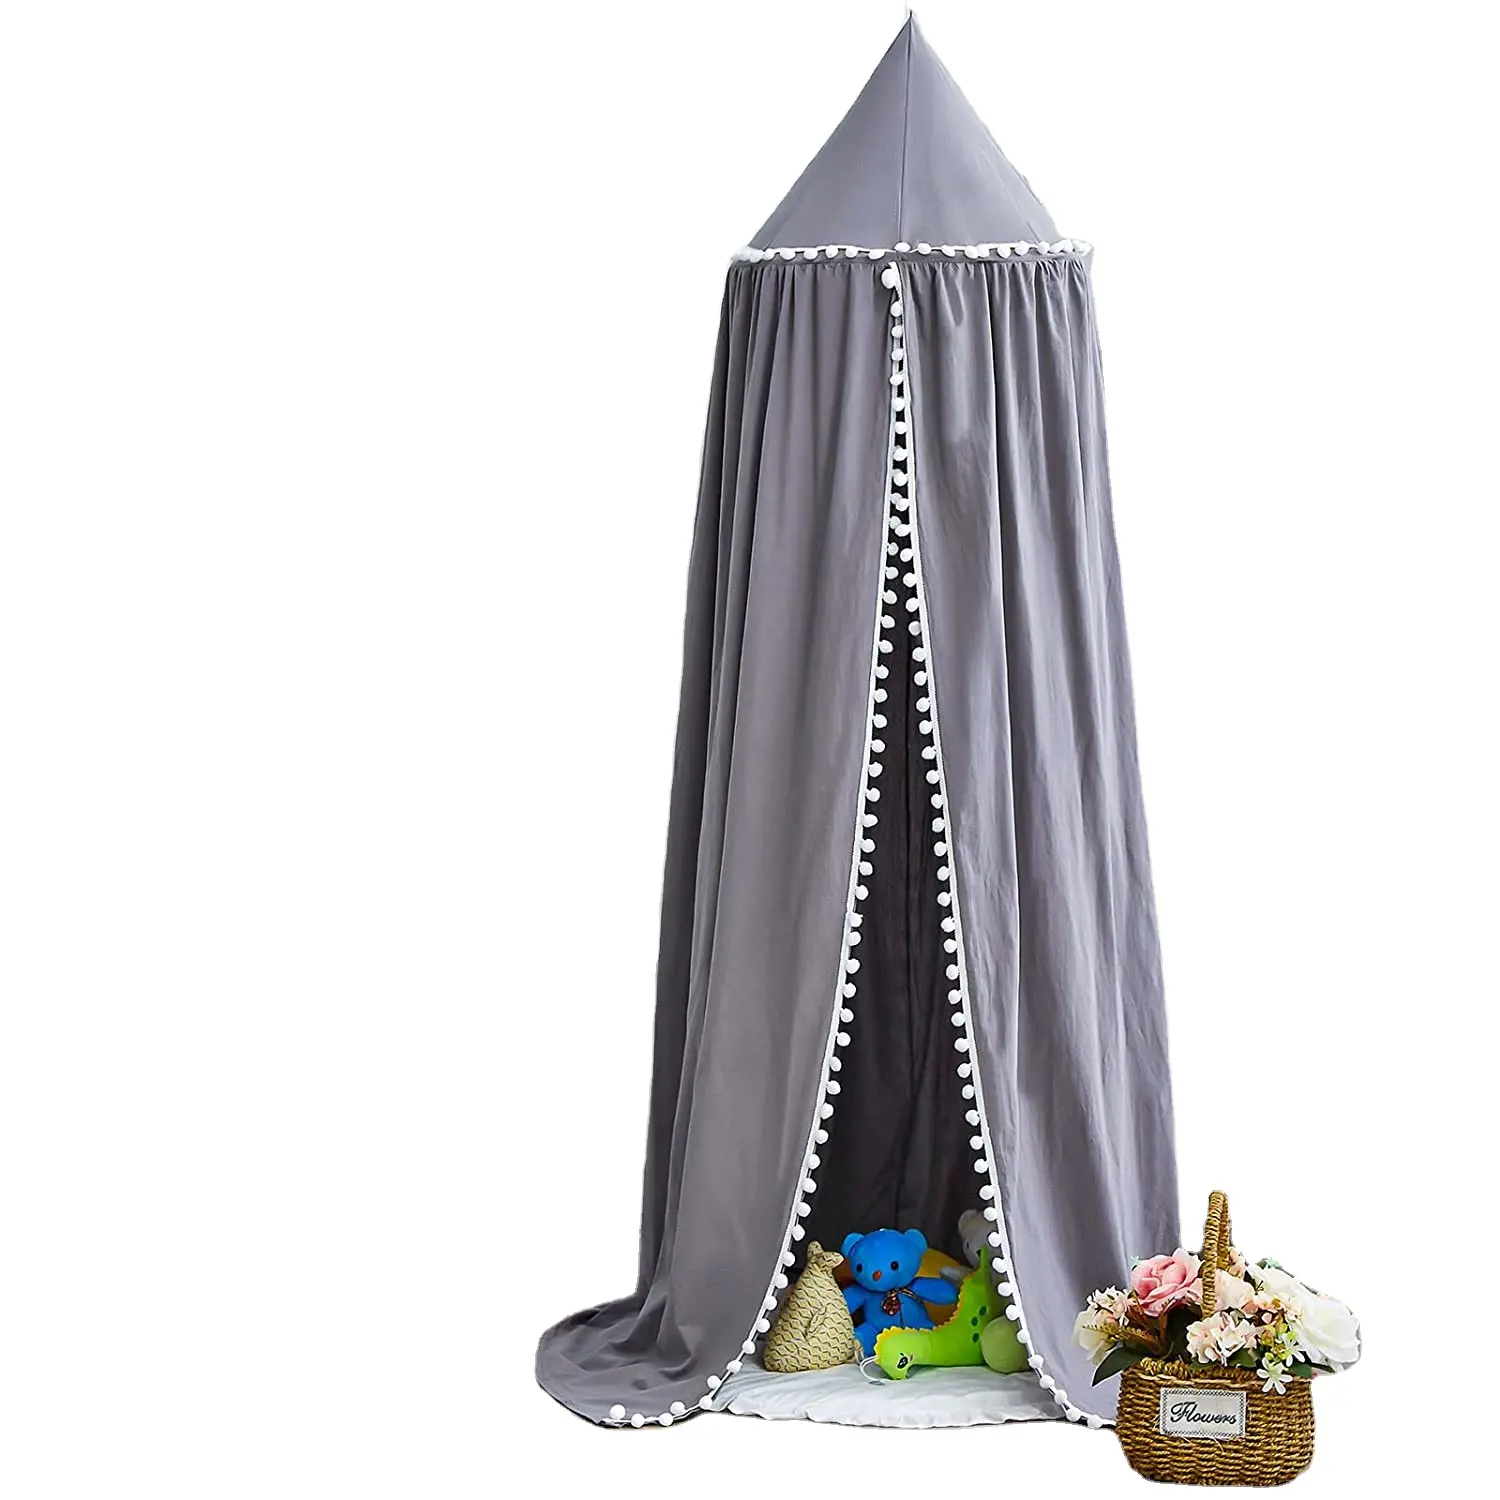 Bed Canopy for Girls Kids,Round Dome Children Dreamy Mosquito Net Bedding Girls Room Castle Play Tent Hanging House with POMPOM